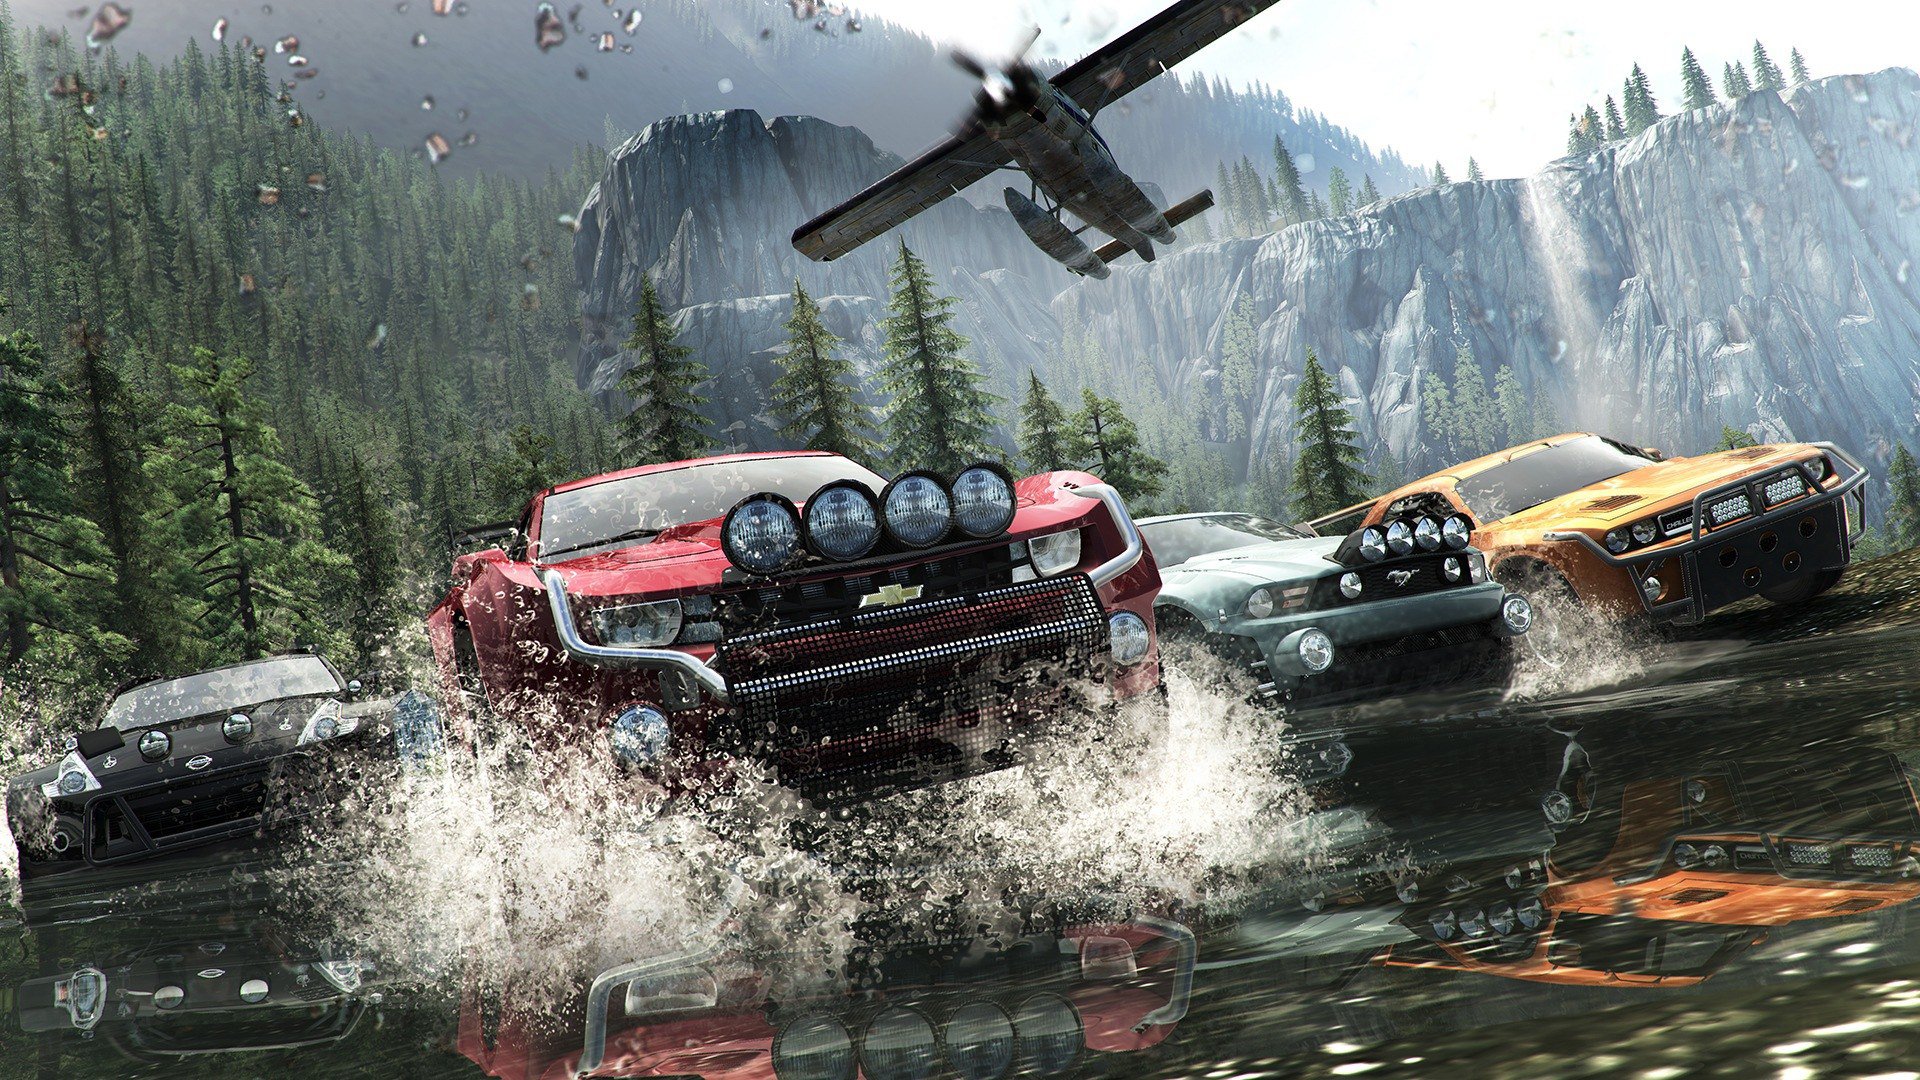 Ubisoft Announced The Crew On PS4 And Xbox One Beta From Nov 6-10